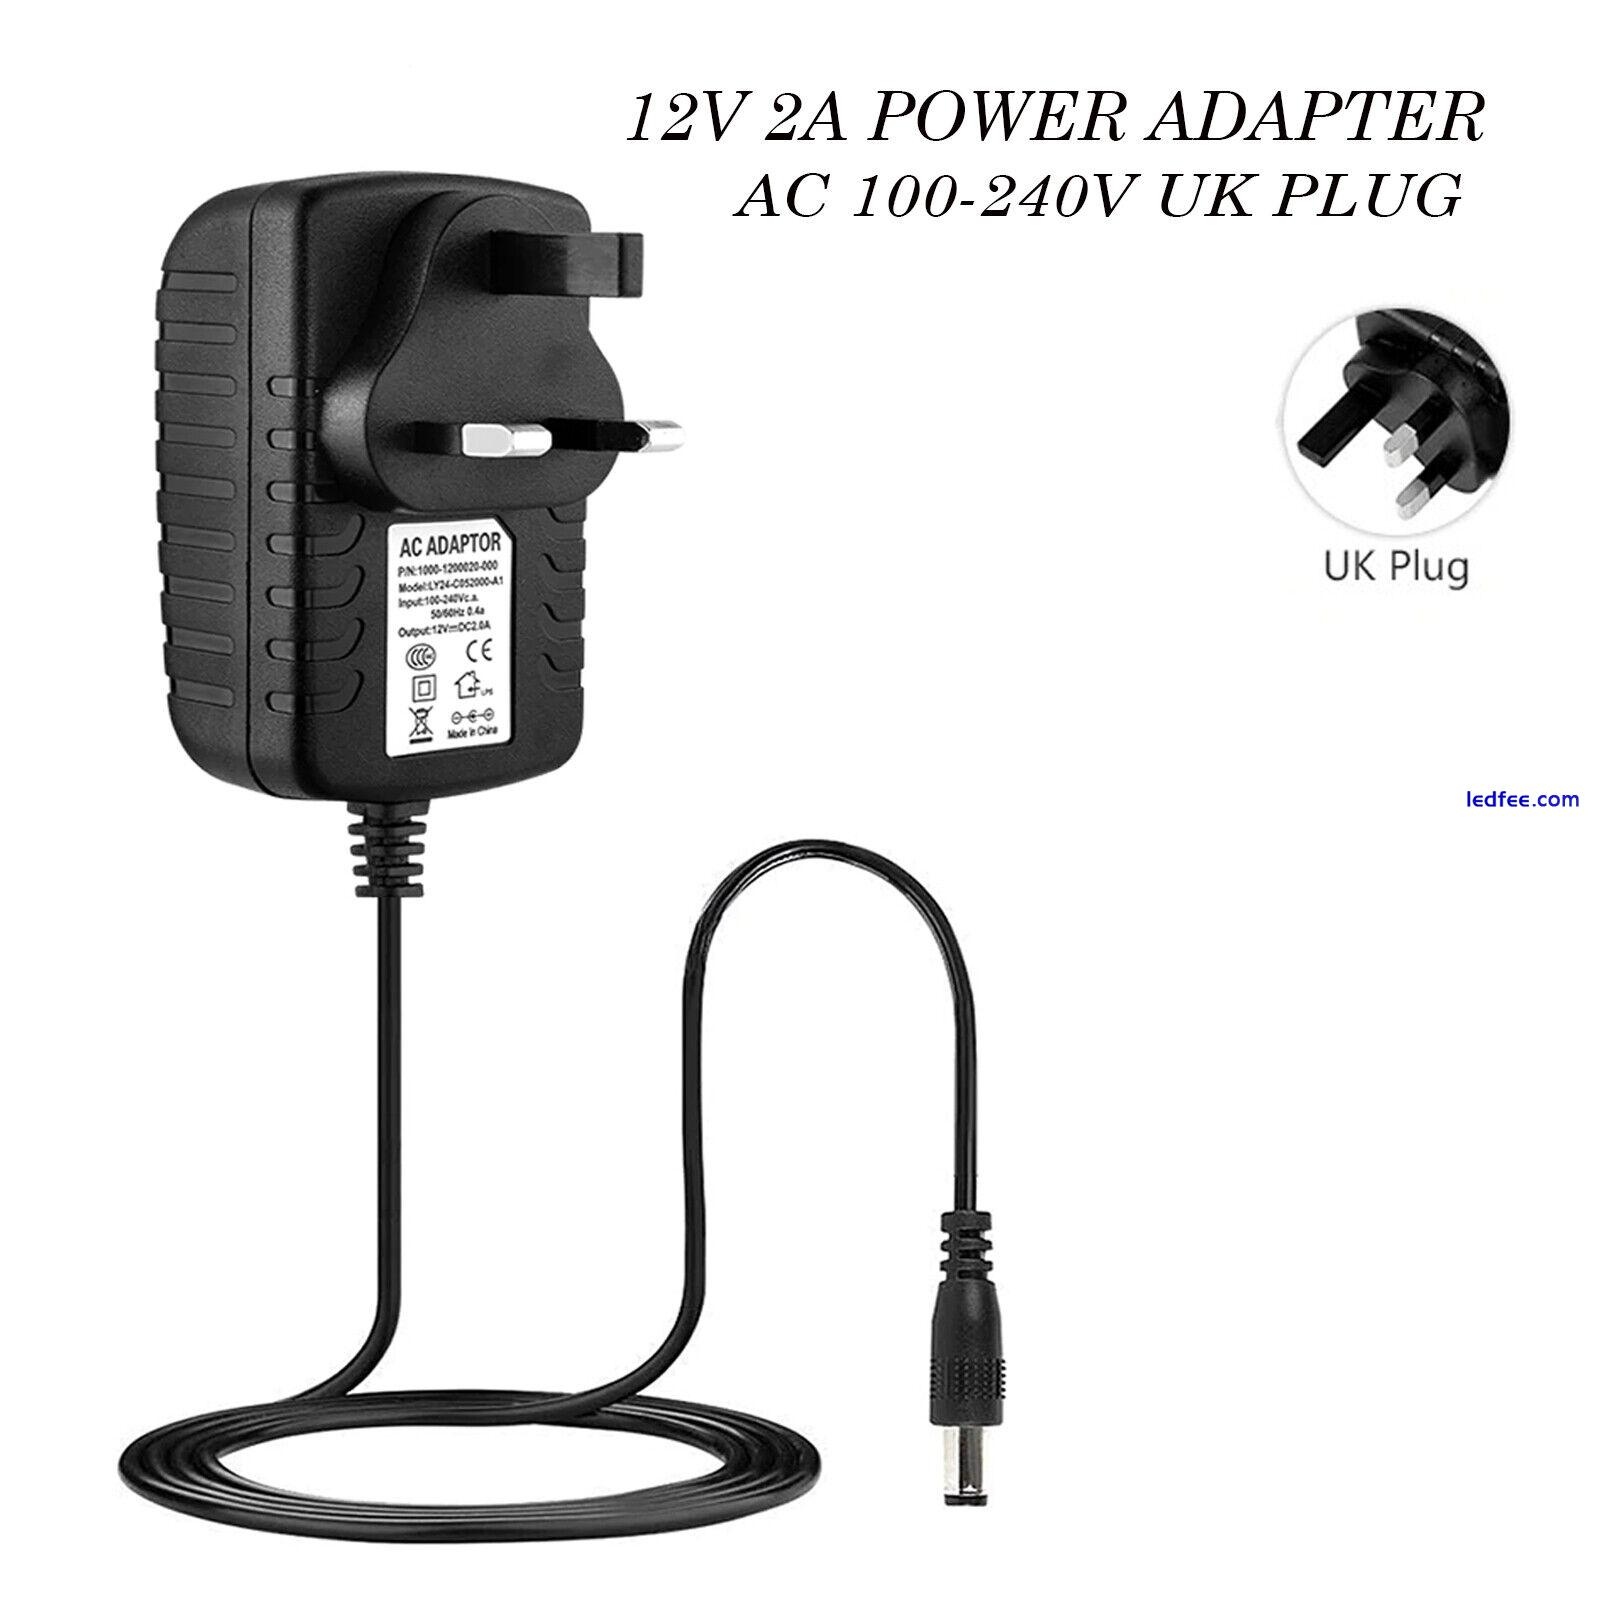 12V 1A 2A AC/DC UK Power Supply Adapter Safety Charger For LED Strip CCTV Camera 5 